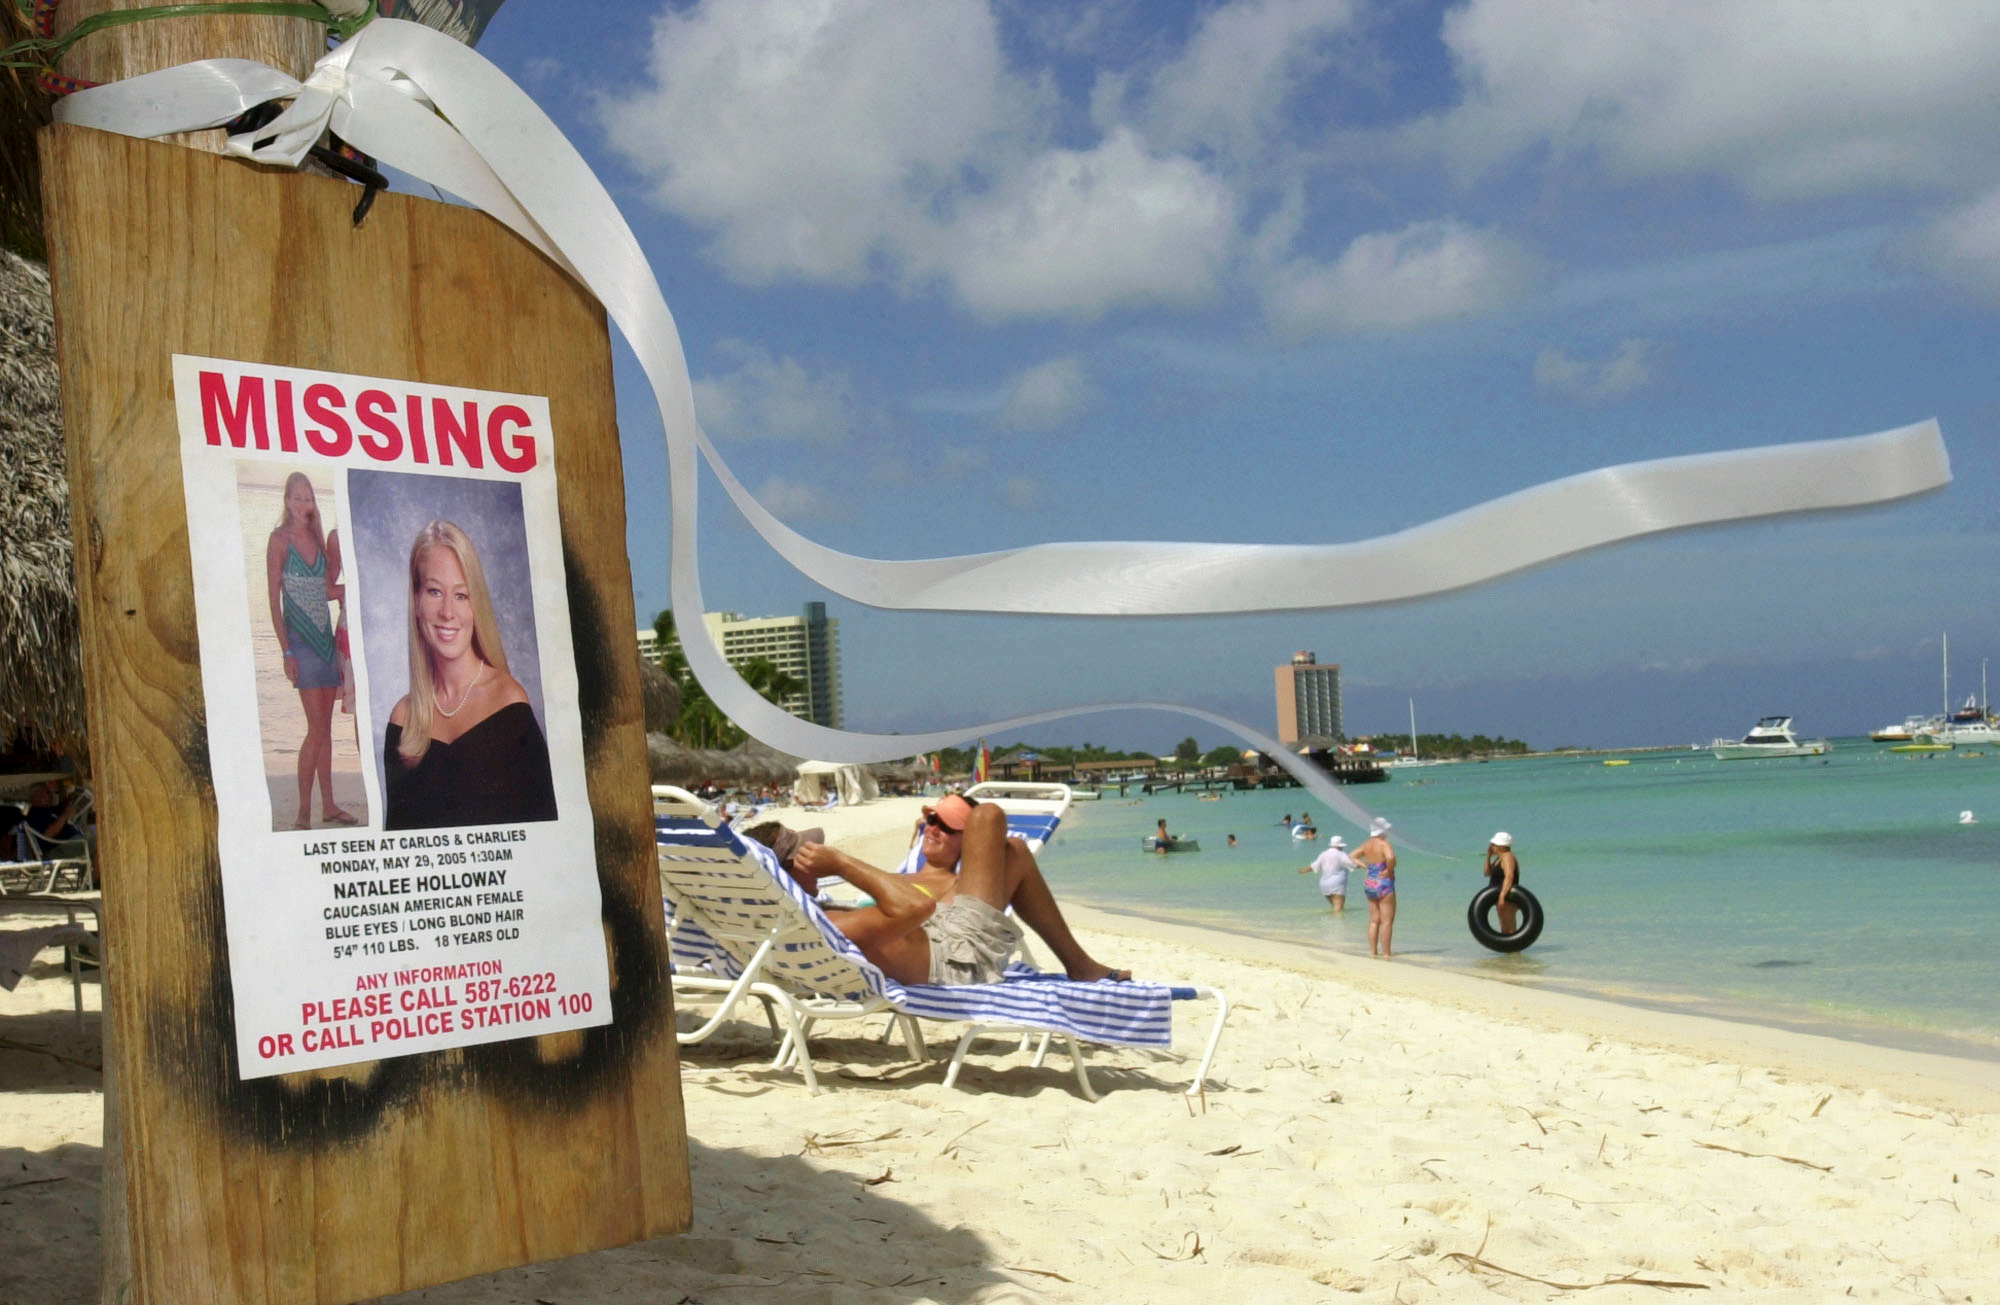 PHOTO: A missing poster for Natalee Holloway, a high school graduate of Mountain Brook, Alabama who disappeared while on a graduation trip to Aruba on May 30, 2005, is seen on Palm Beach where tourists sunbathe in Aruba, June 10, 2005.